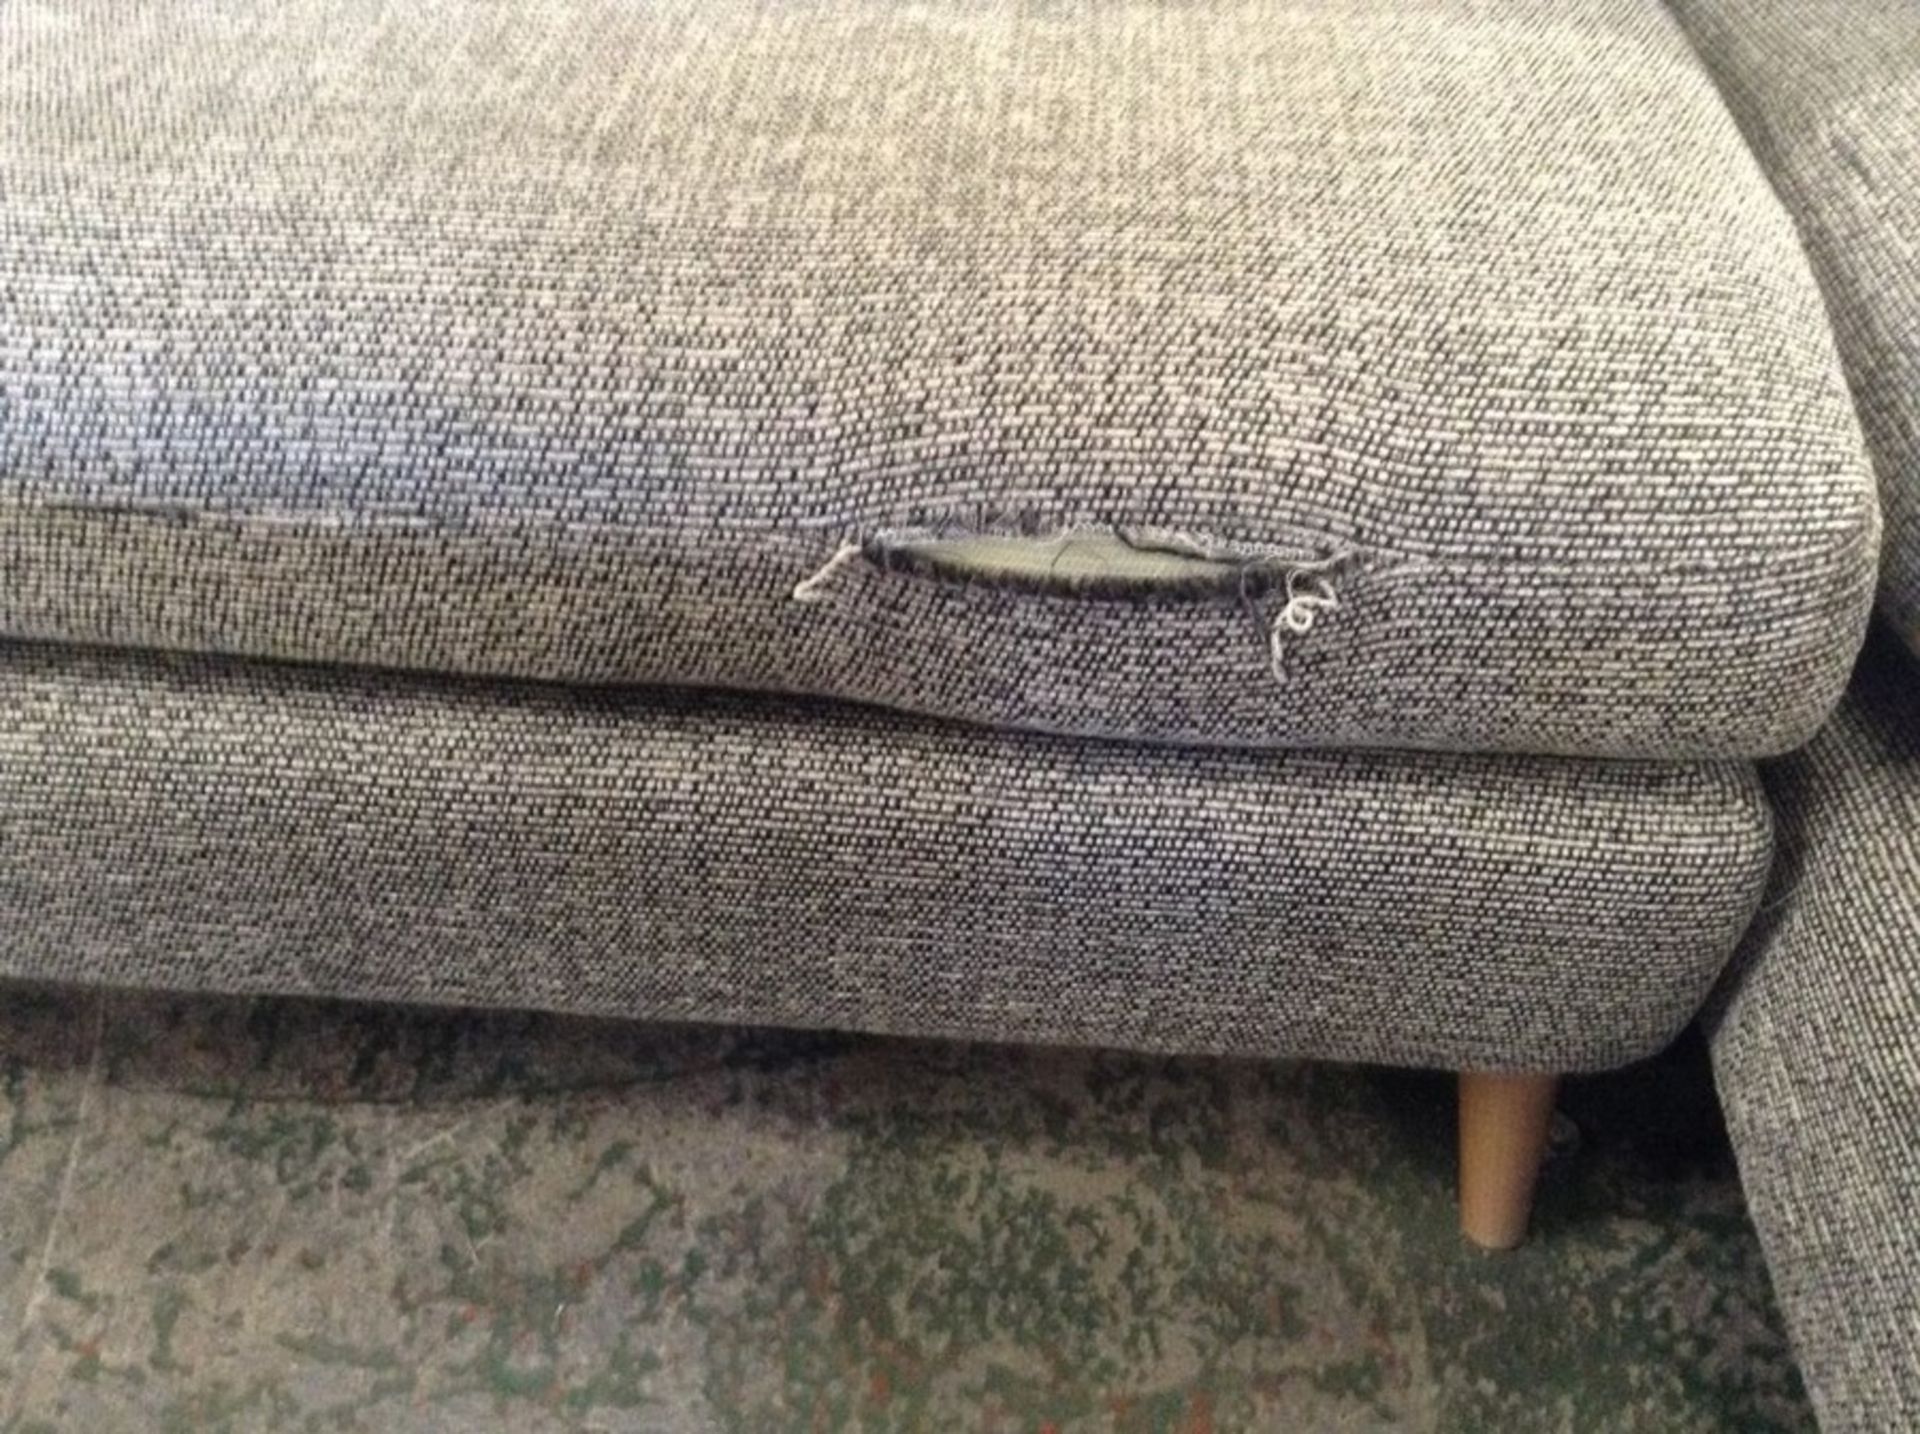 GREY PATTERNED 2 PART CORNER GROUP CHAIR AND FOOTS - Image 2 of 2